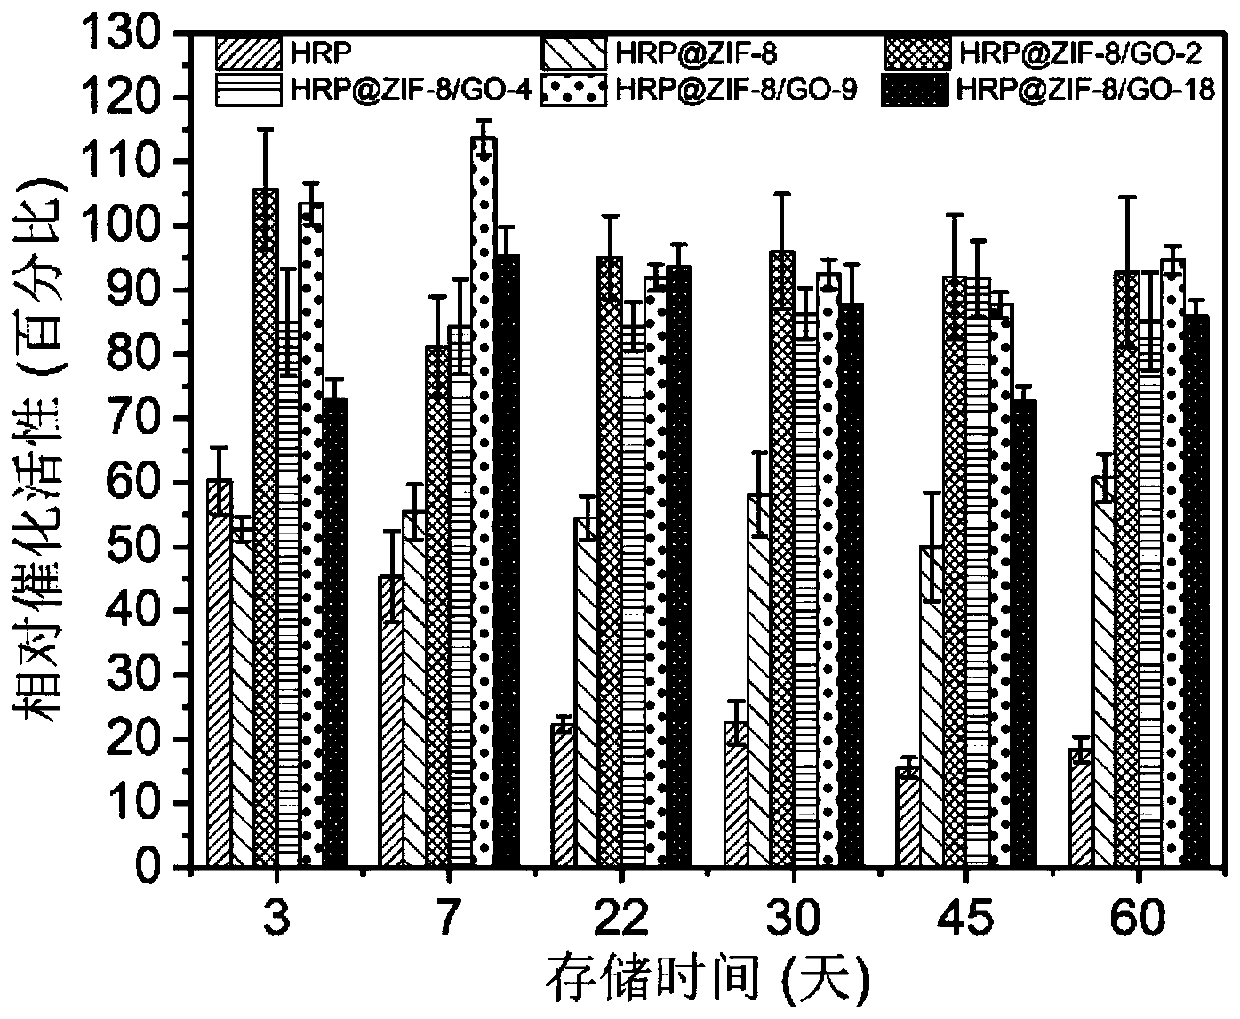 Immobilized enzyme method for improving stability of horseradish peroxidase and application